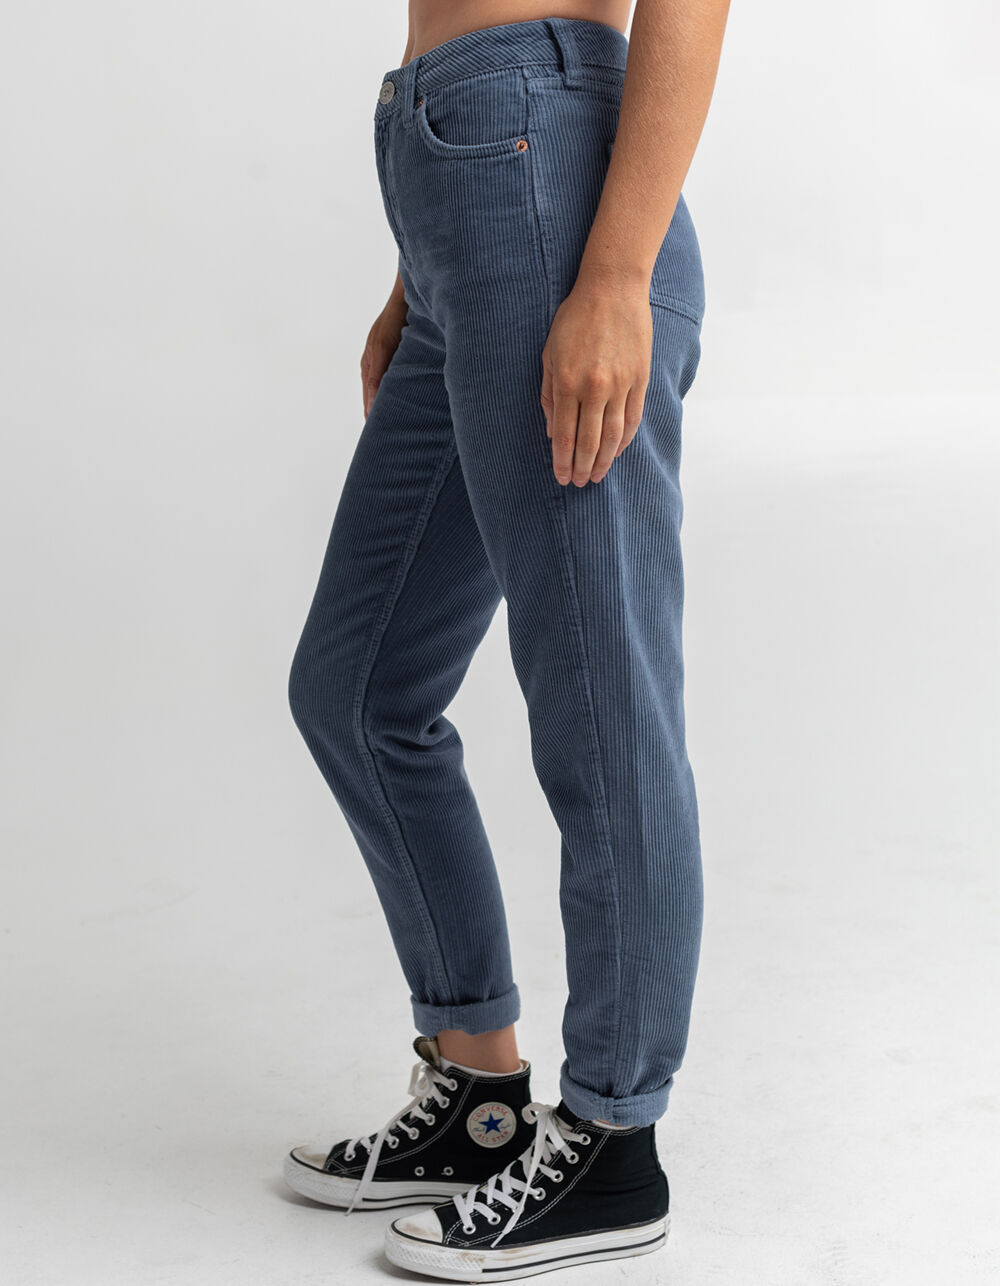 Urban Outfitters, Pants & Jumpsuits, Bdg High Rise Corduroy Pants